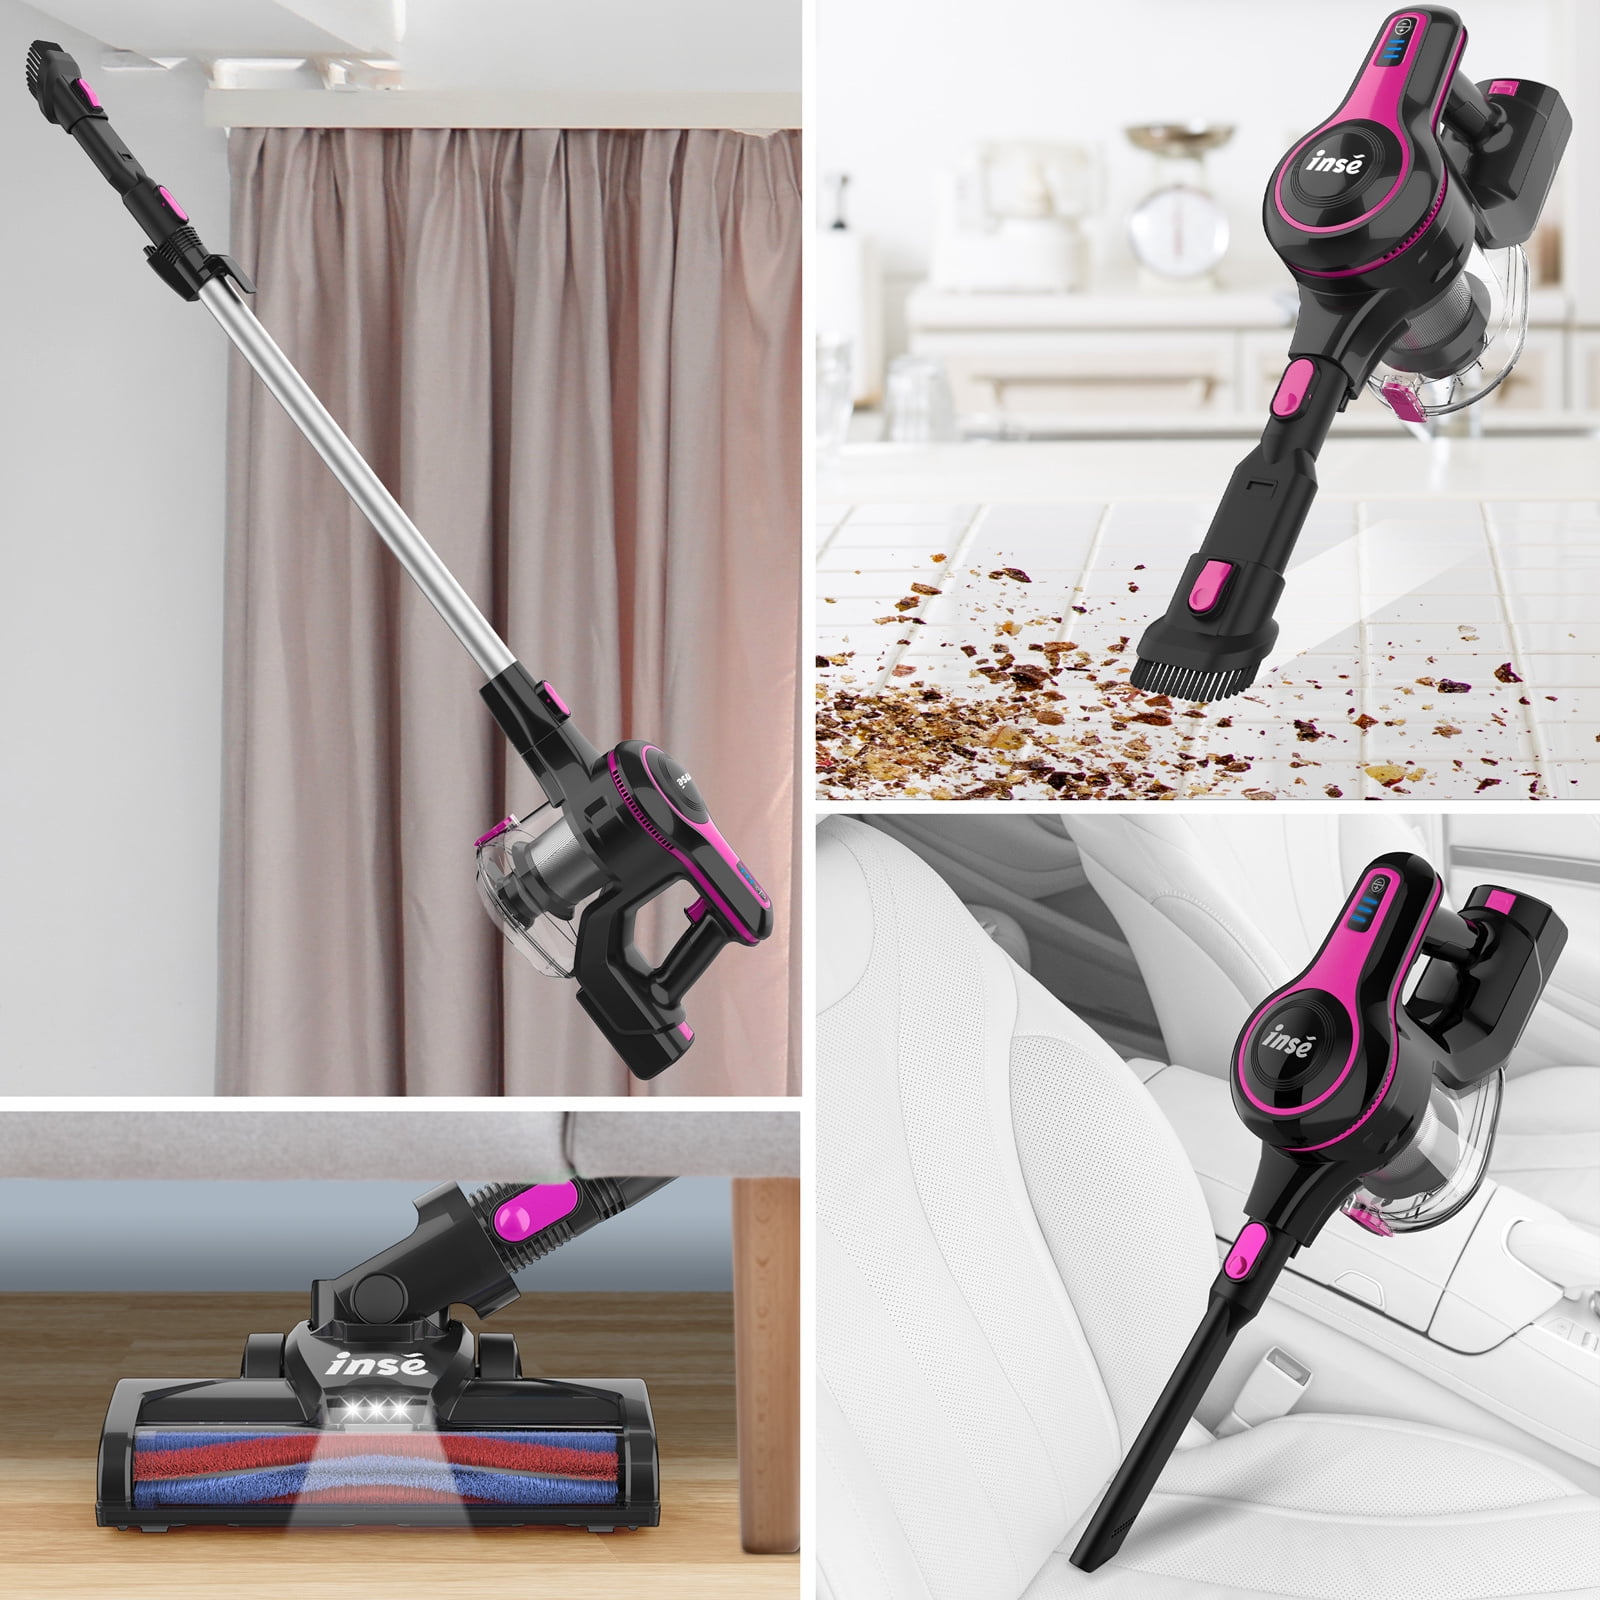 INSE Cordless Vacuum Cleaner, 6 in 1 Powerful Suction Lightweight Stick Vacuum with 2200mAh Rechargeable Battery, Up to 45min Runtime, for Carpet Hardwood Floor Car Pet Hair - 2